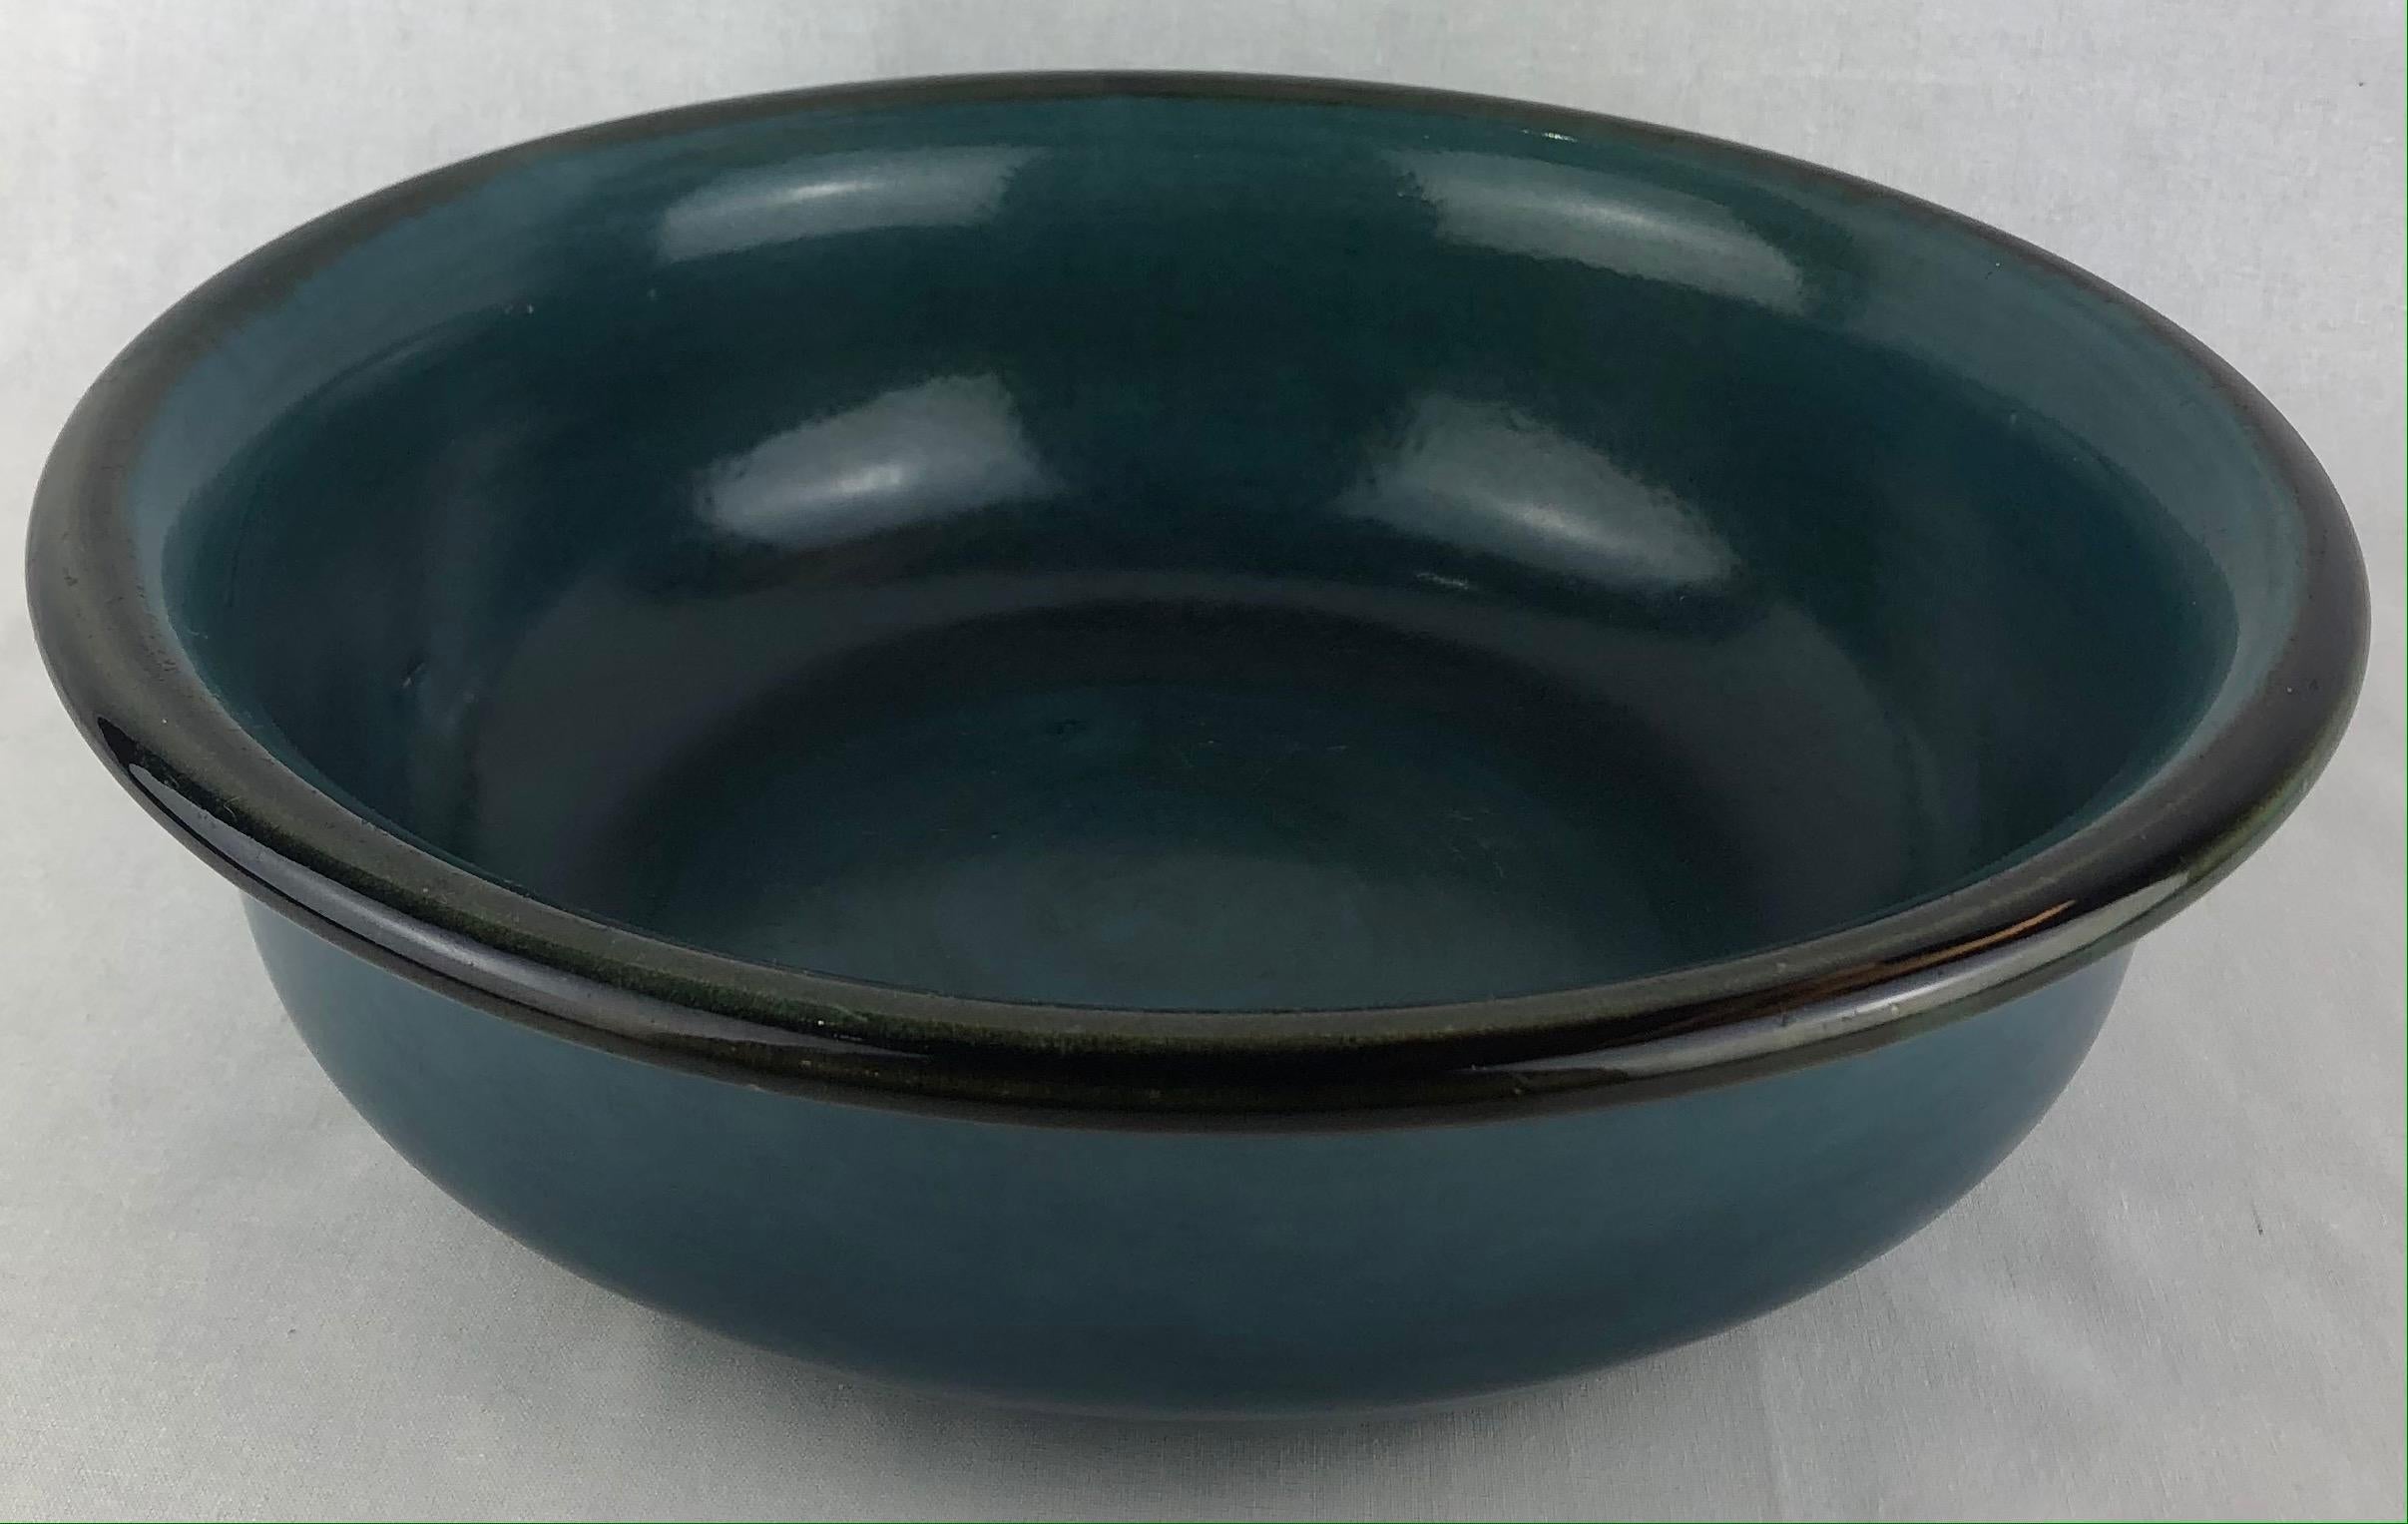 Stunning and stylish hand-crafted blue matte bowl by Saint Clement pottery studio/workshop, France.

Signed on the underside with Saint Clement logo. 
Measures: 11 7/8